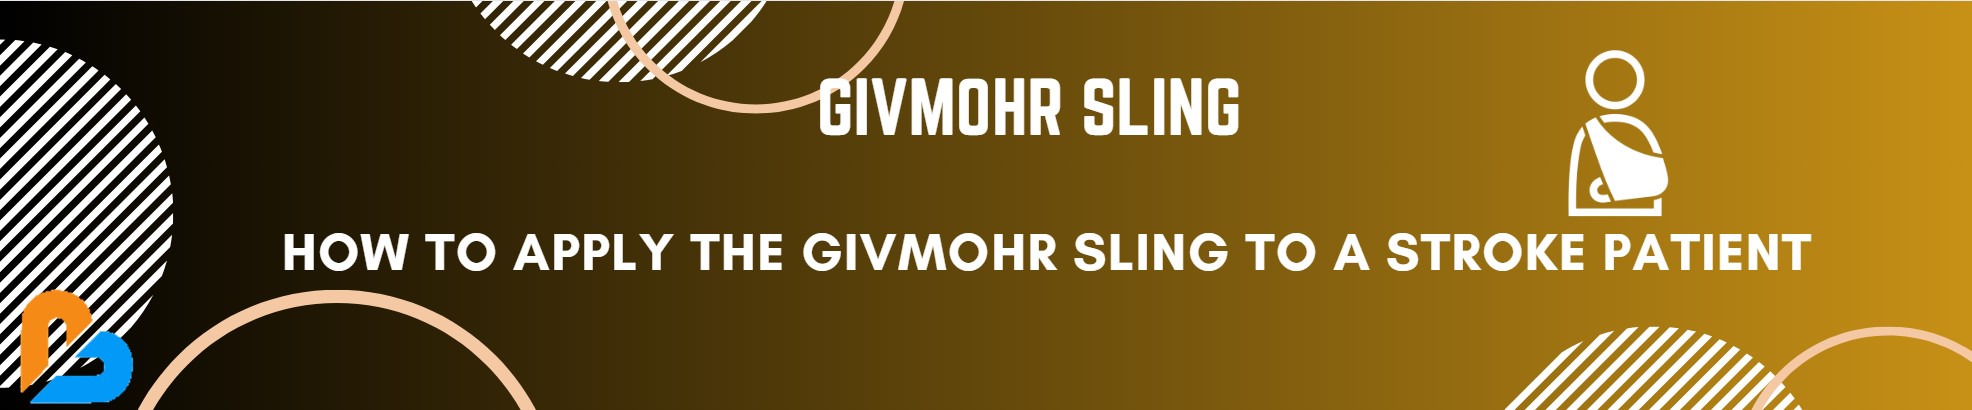 How to Apply the Givmohr Sling to a Stroke Patient